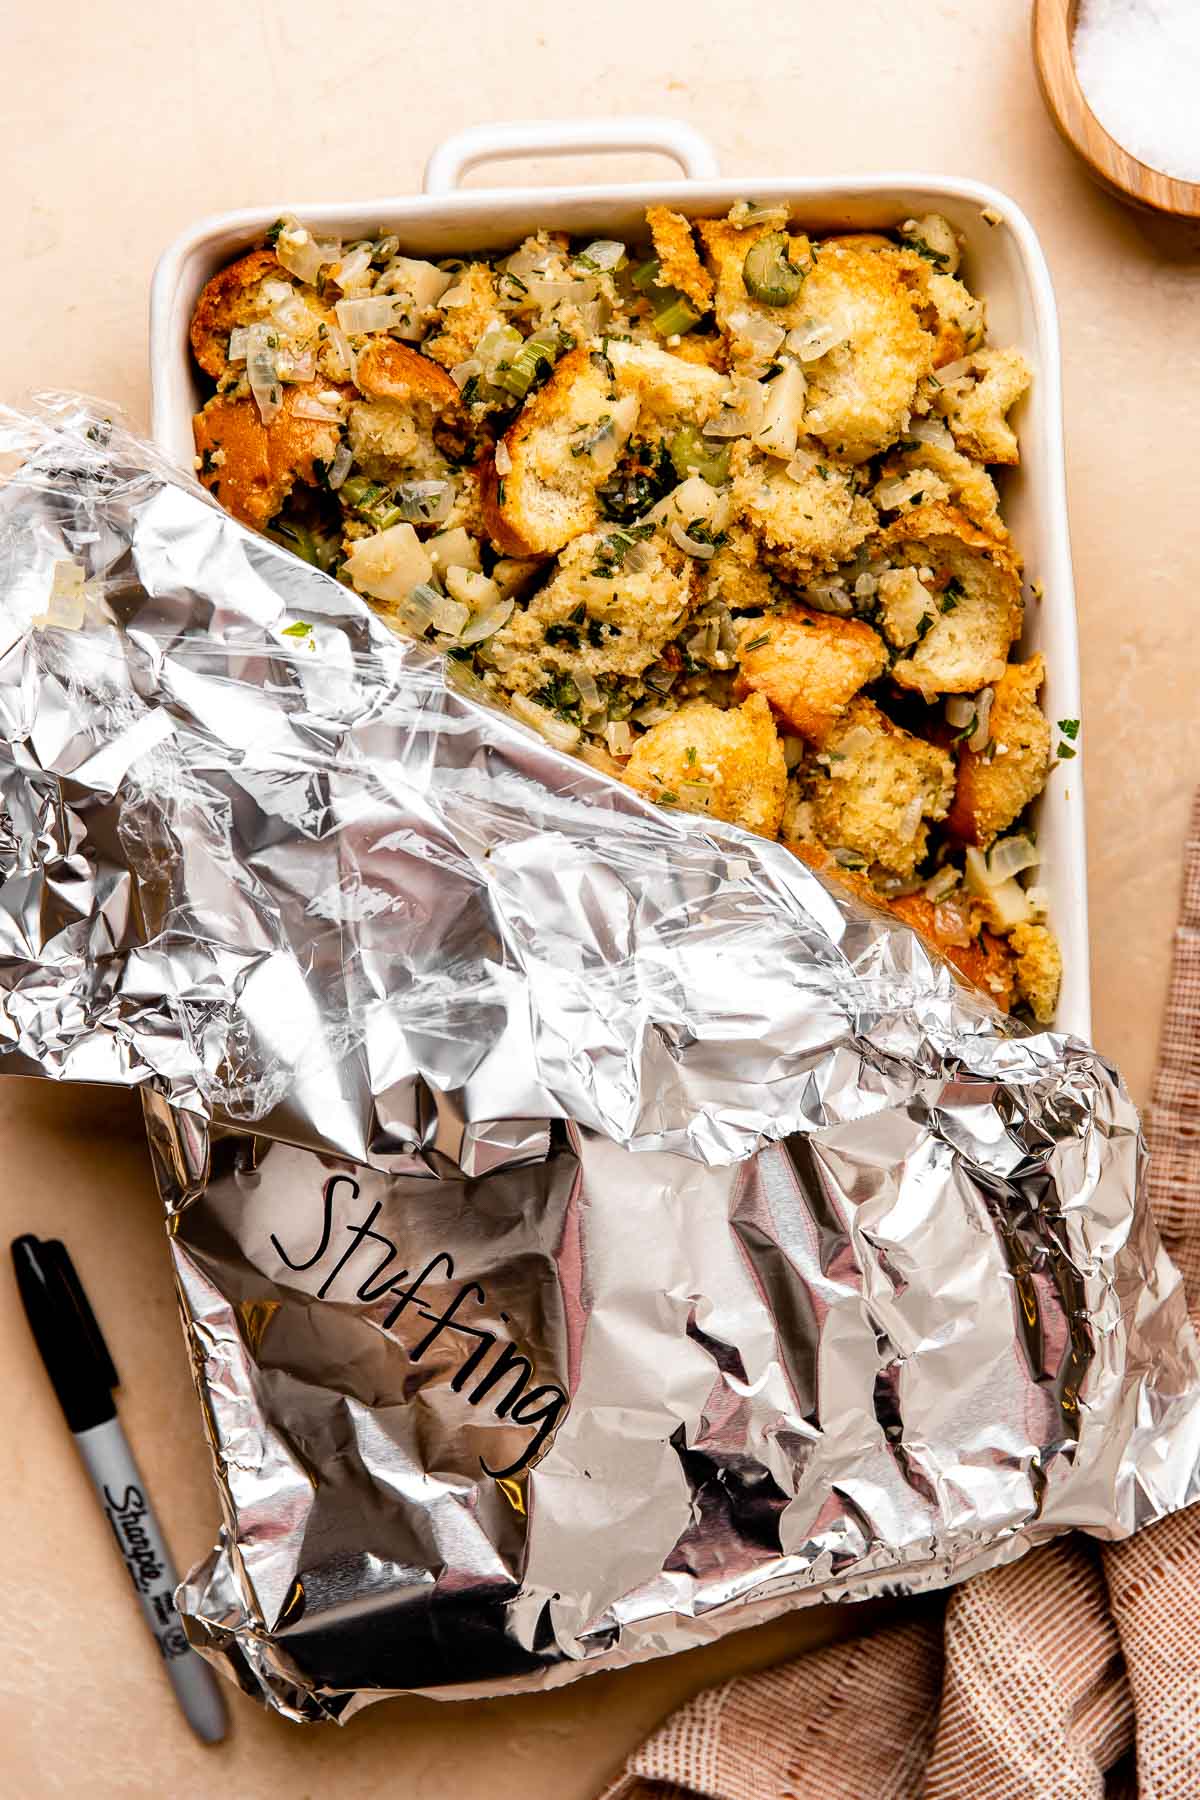 Partially assembled make ahead thanksgiving stuffing fills a large white ceramic baking dish that sits atop a light peach colored textured surface. The baking dish is partially covered with plastic wrap and aluminum foil and the words stuffing have been written on the outside of the foil in black permanent marker. The baking dish is surrounded by a black Sharpie marker, a small wooden pinch bowl filled with kosher salt, and a red muted linen napkin.